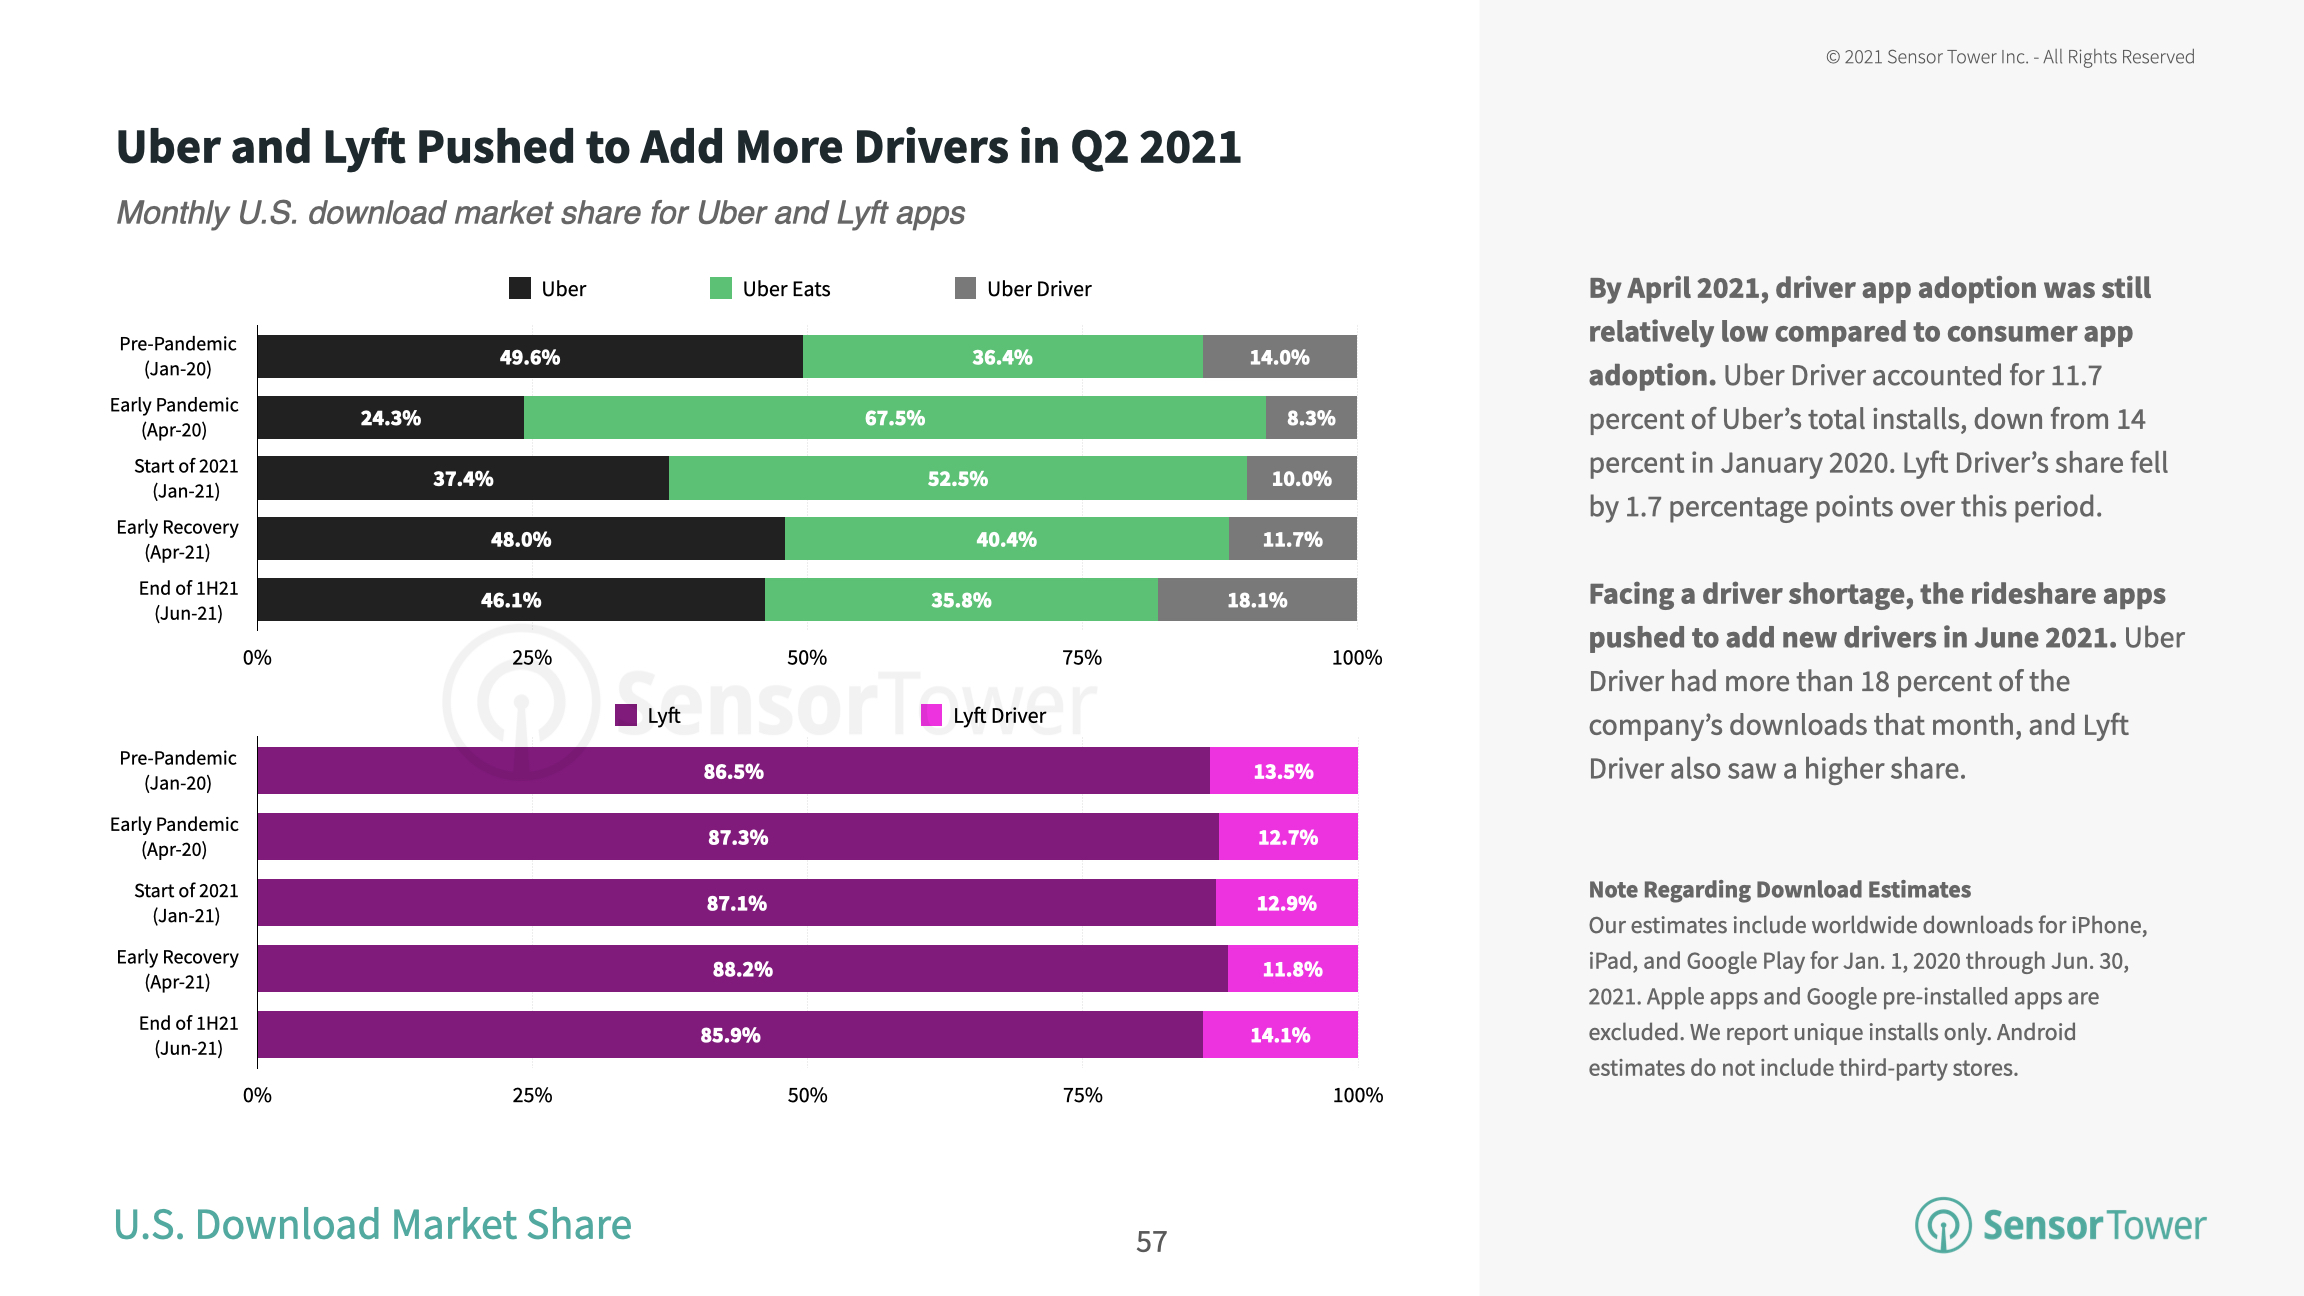 Uber and Lyft pushed to add more drivers in Q2 2021